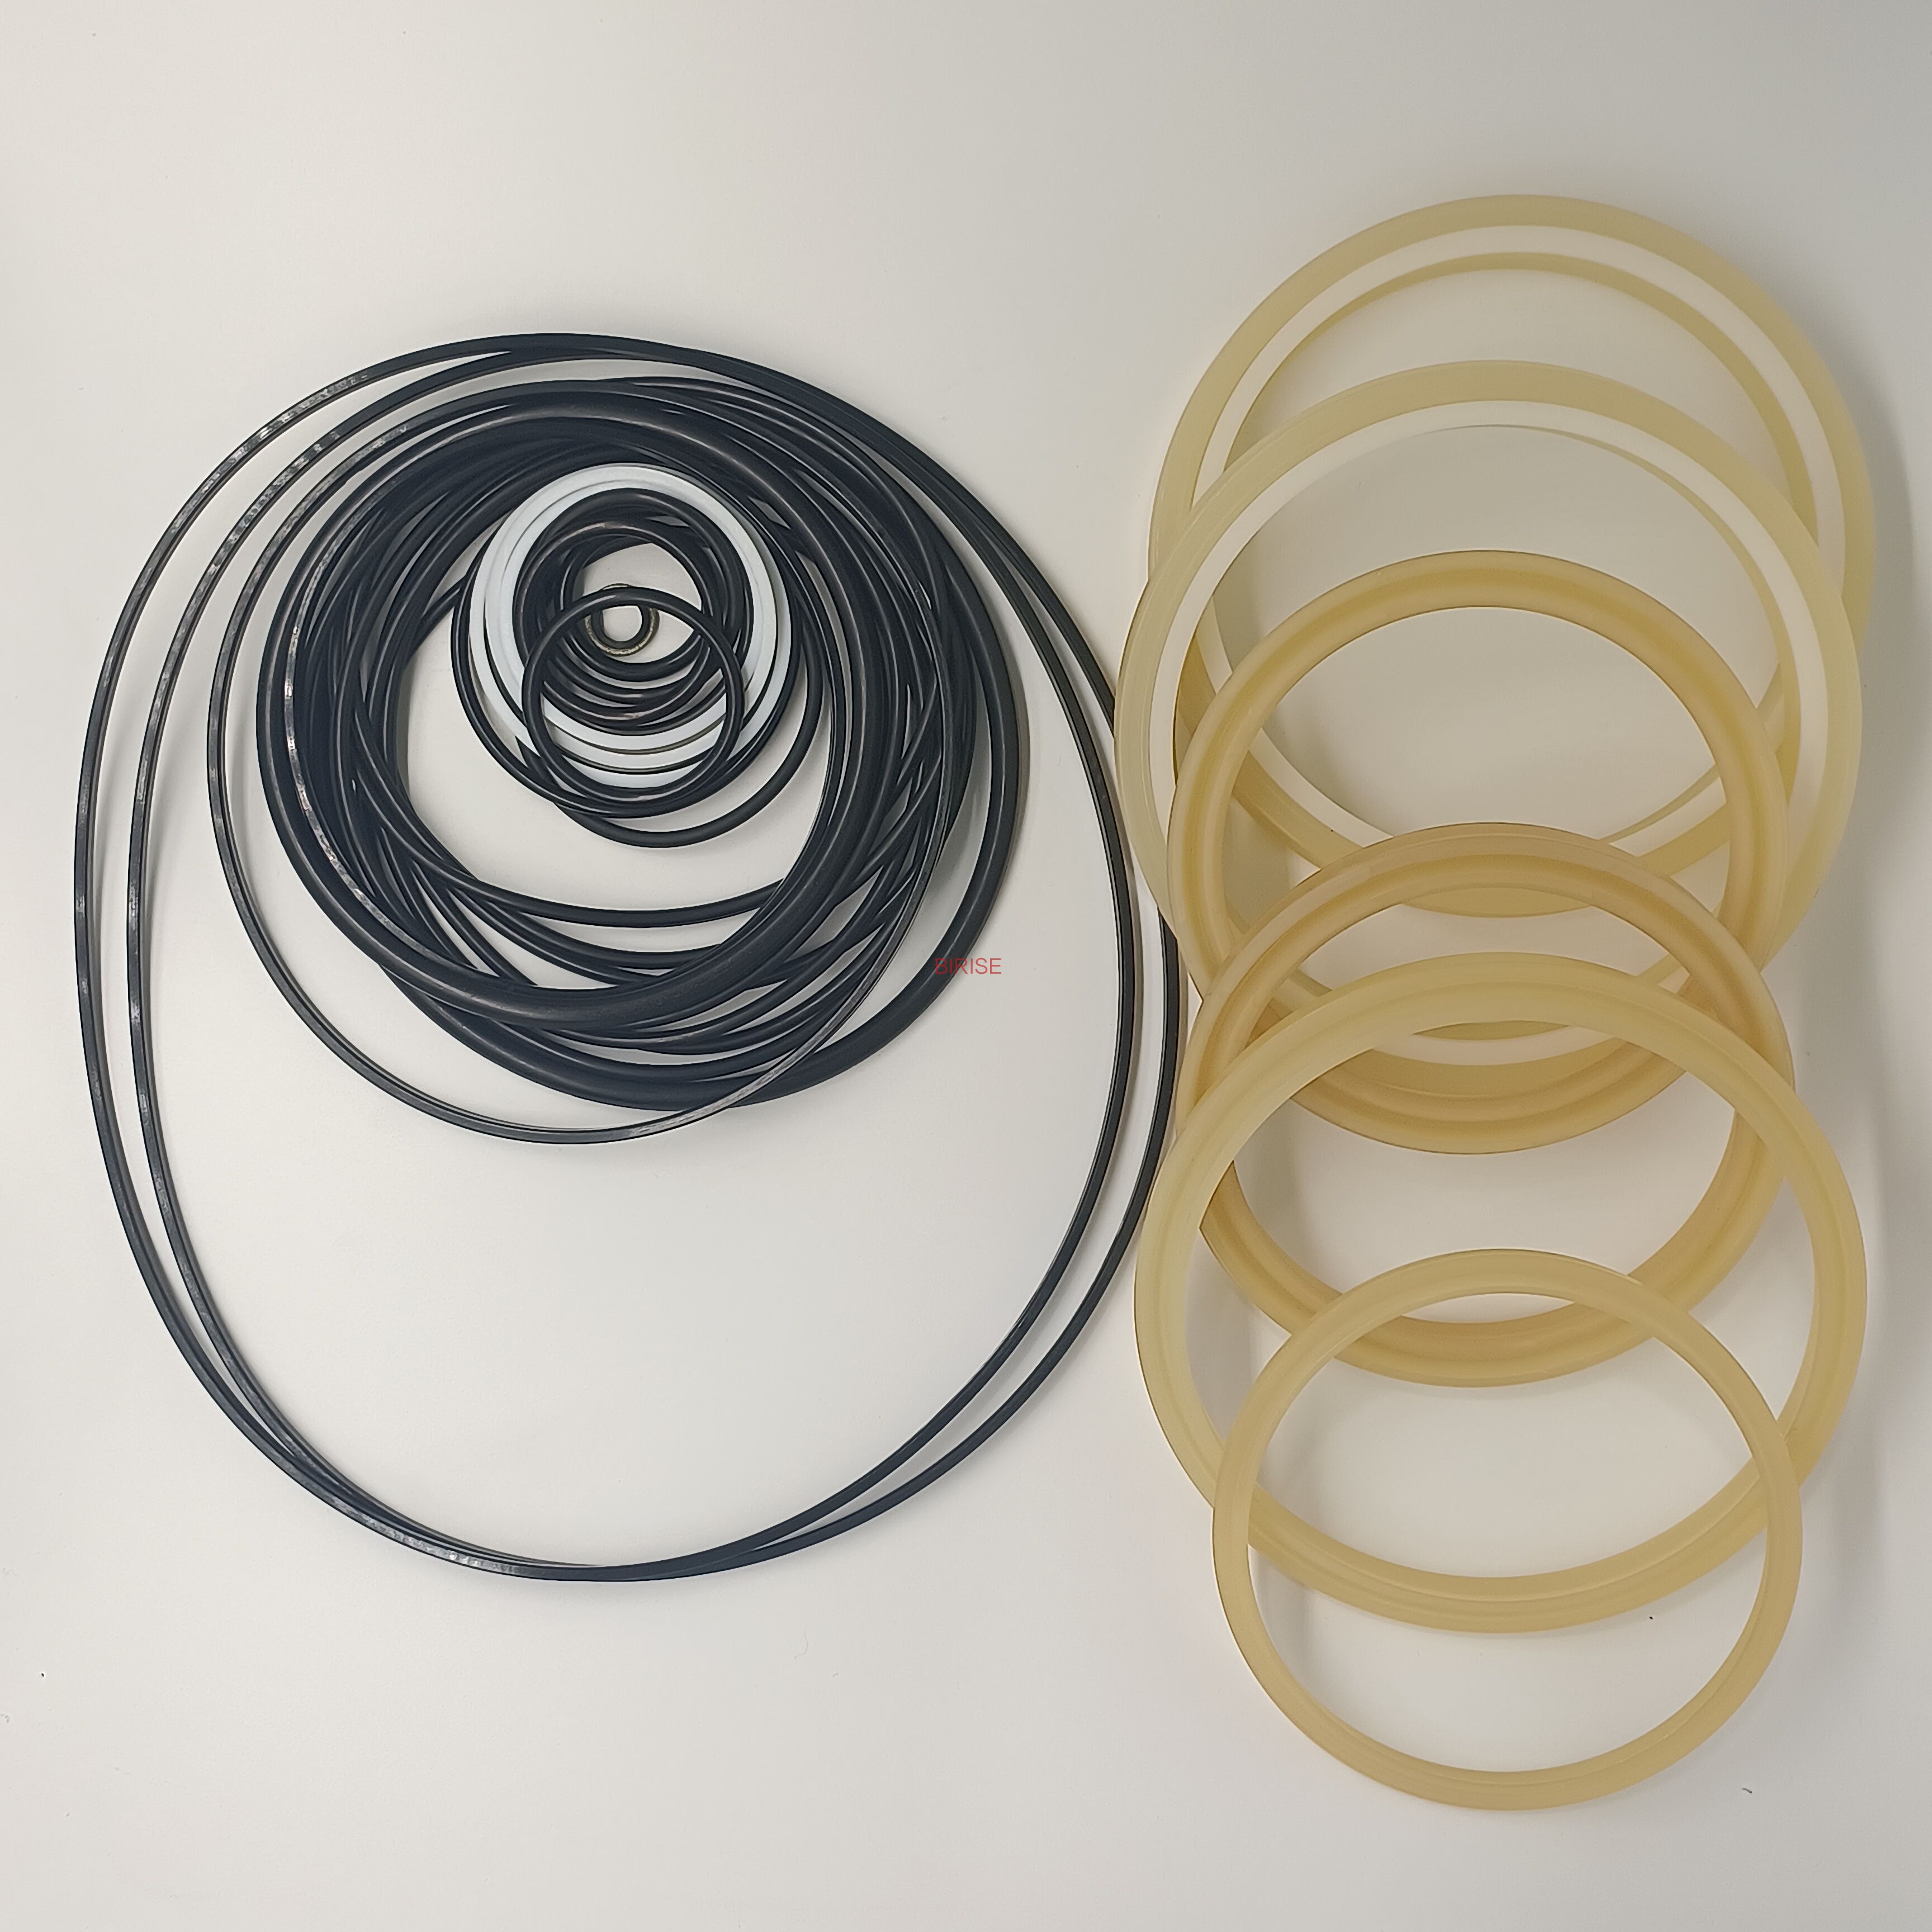 Hydraulic Breaker Seal Kits for Reliable Equipment Maintenance